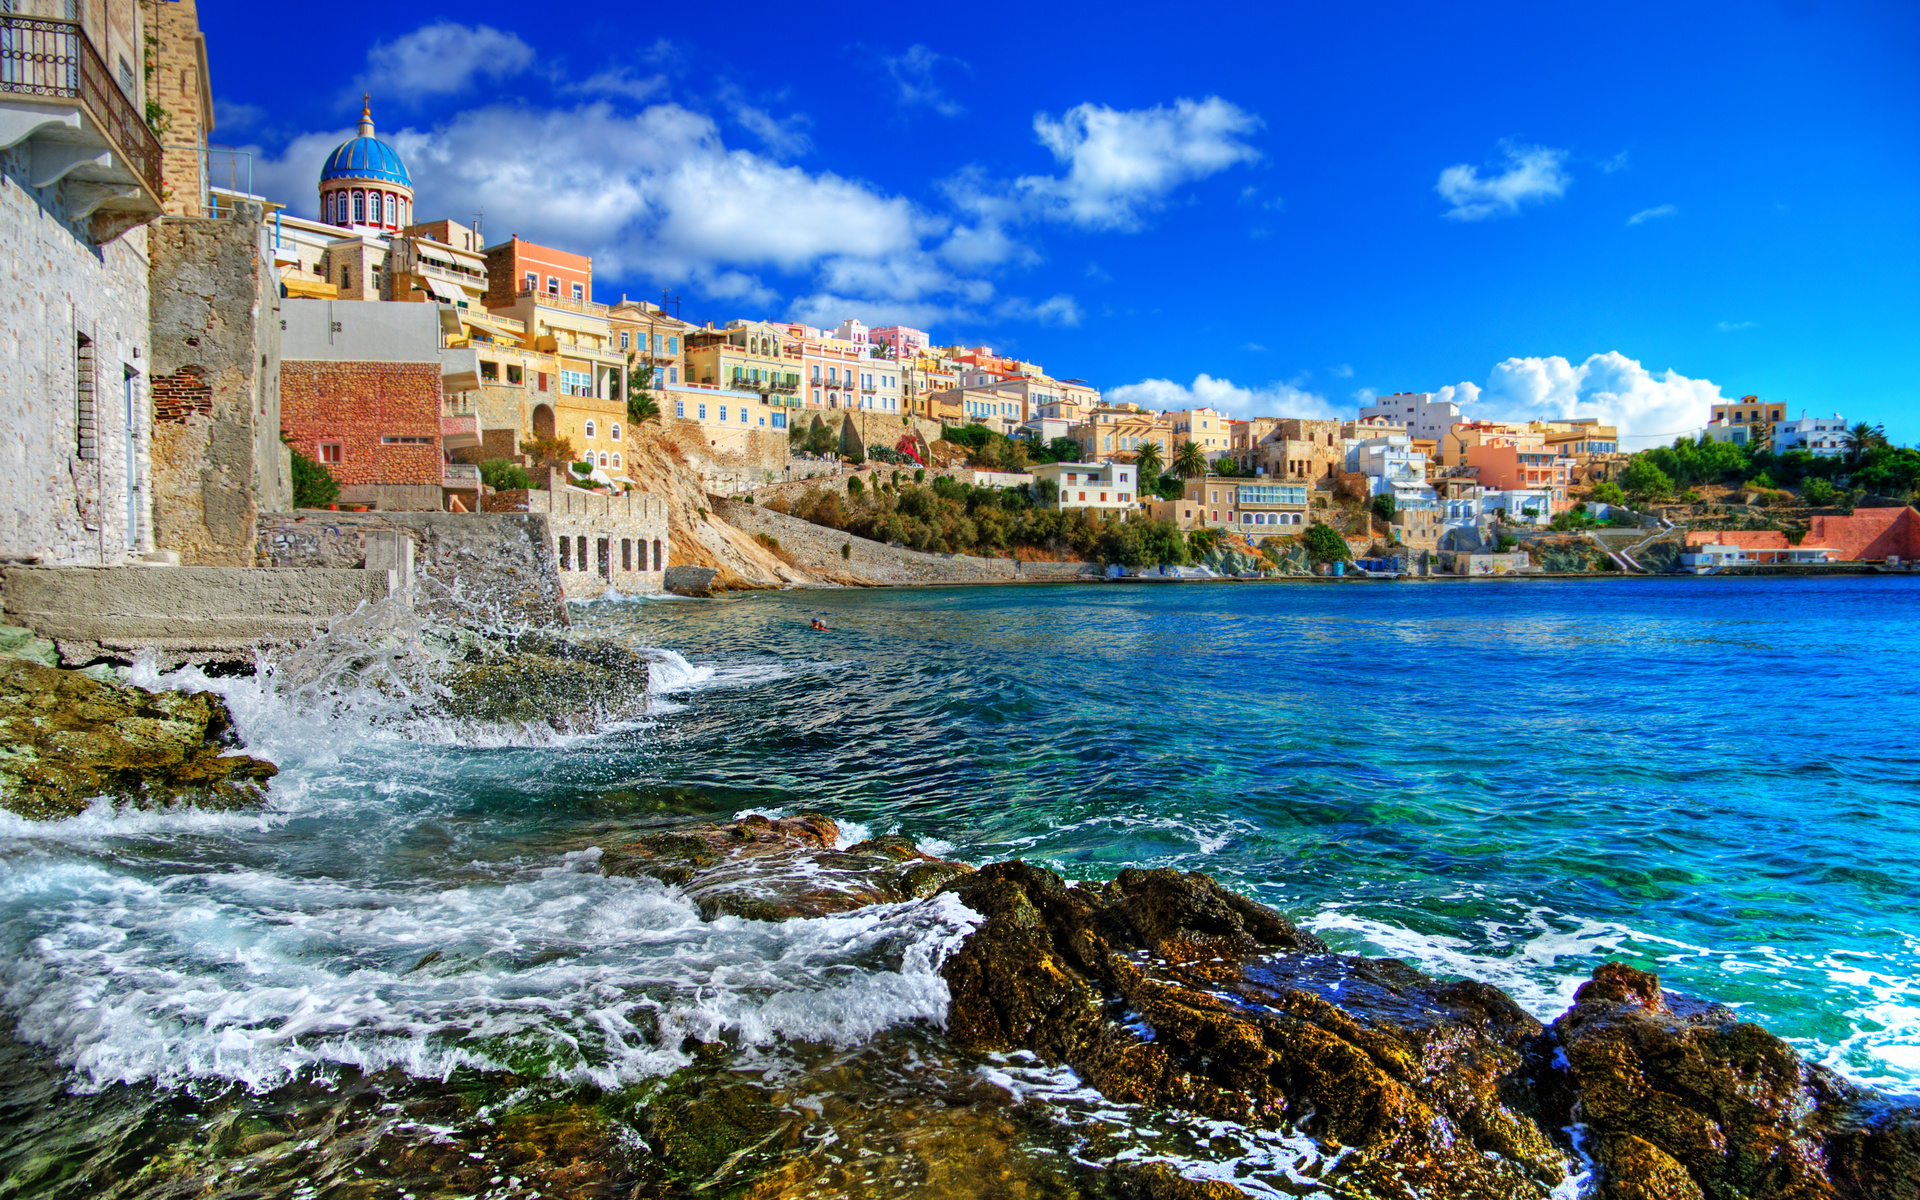 tropical, villa, place, man made, sea, wave, architecture, village, shore, town, building, cloud, greece, house, ocean, scenic, sky, syros, towns